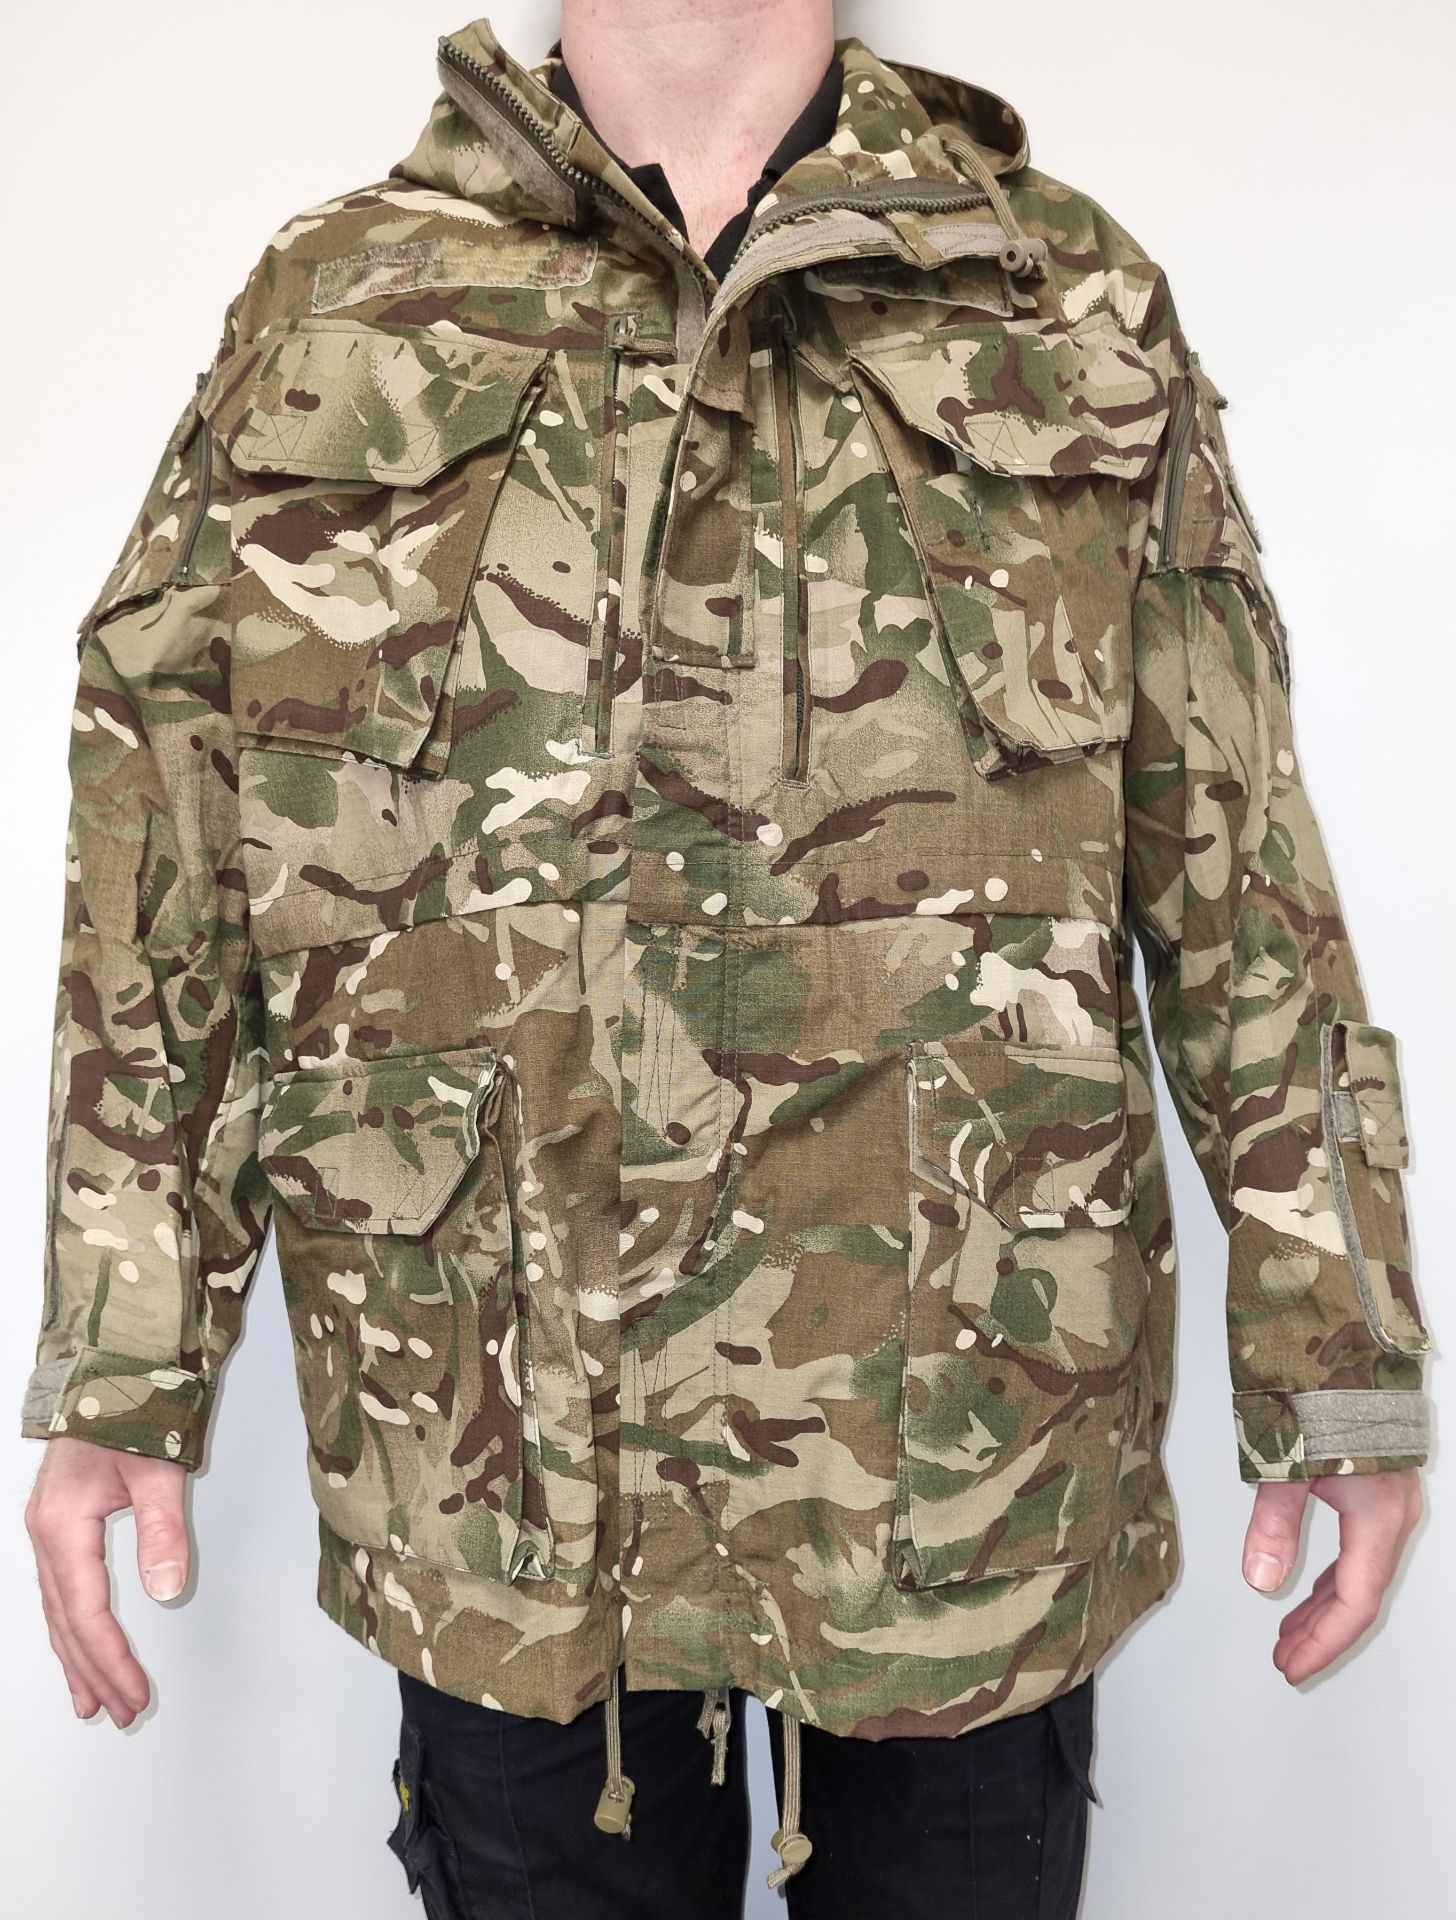 25x British Army MTP windproof smocks - mixed grades and sizes - Image 2 of 10